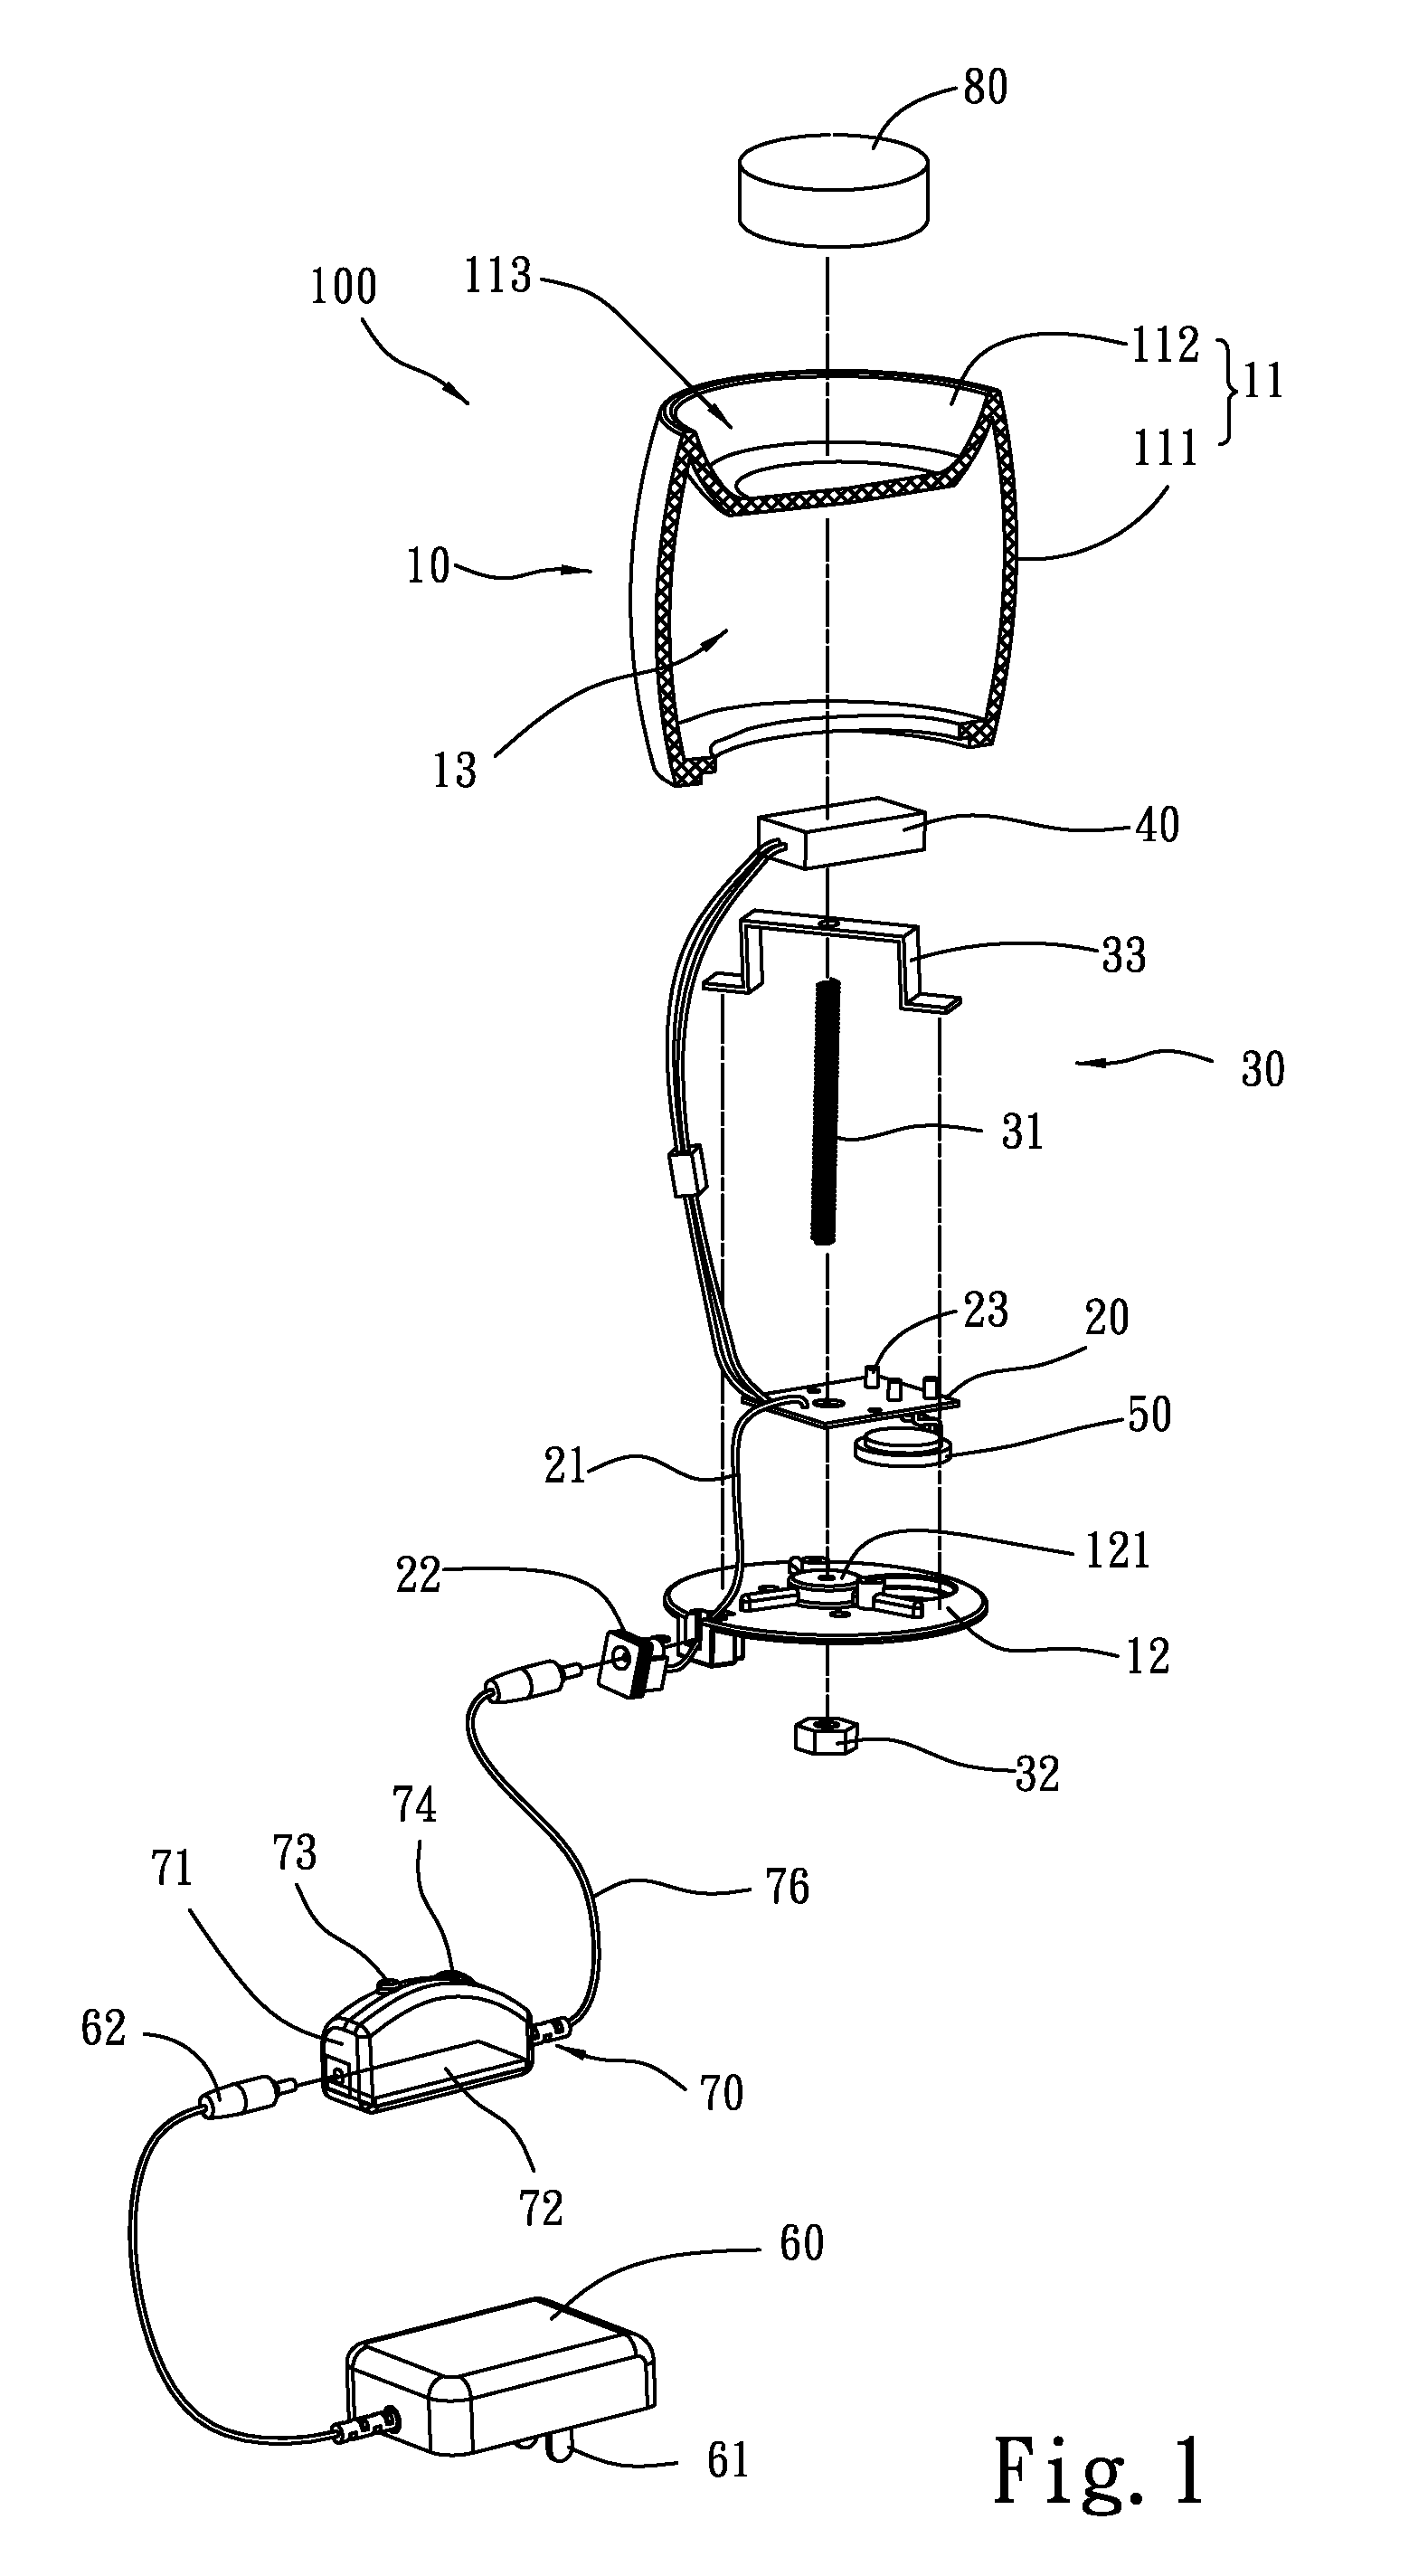 Music generating and aromatic substance retaining and heating system